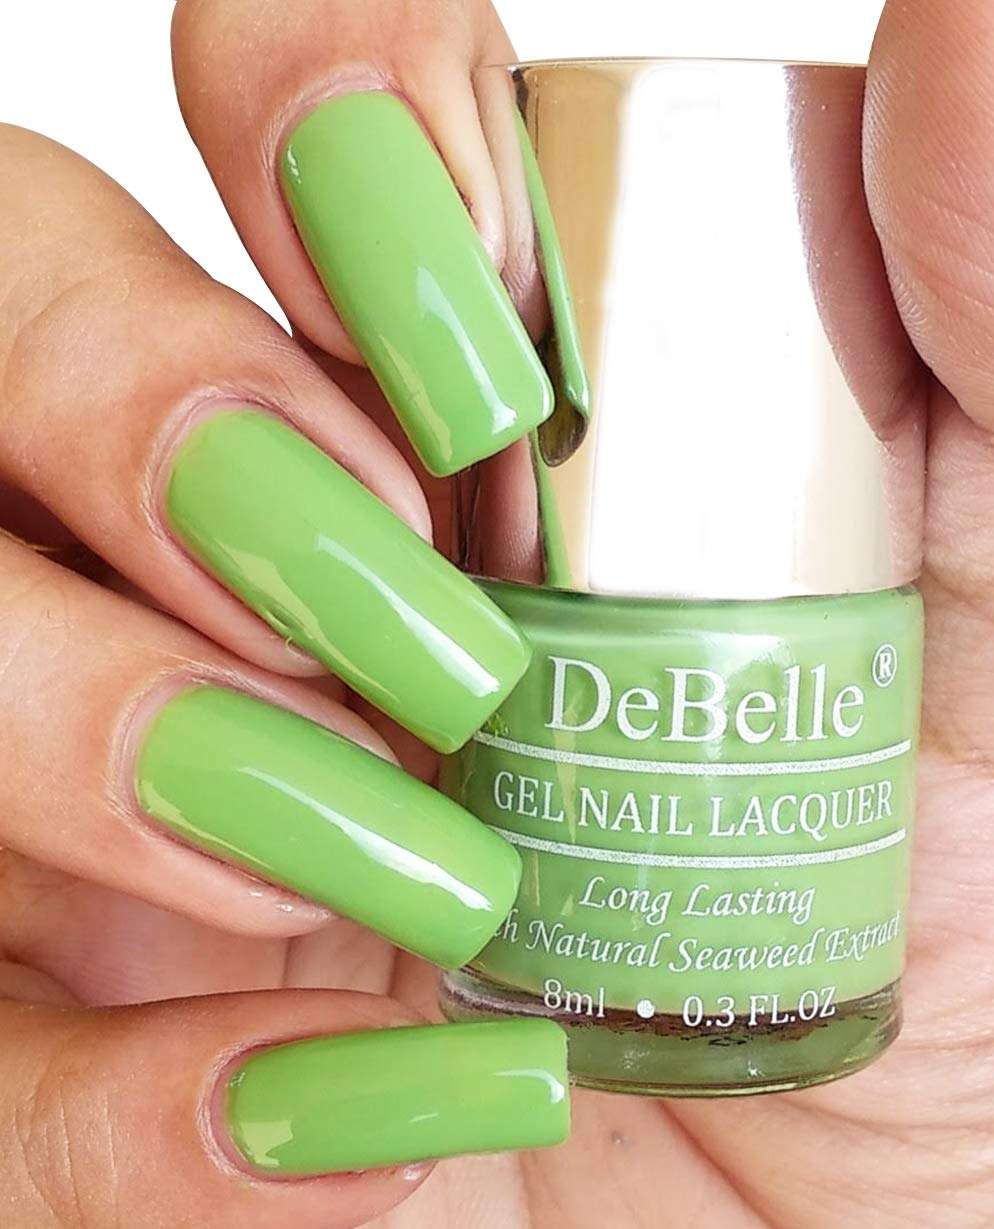 Buy DeBelle Gel Nail Lacquer Mystique Green